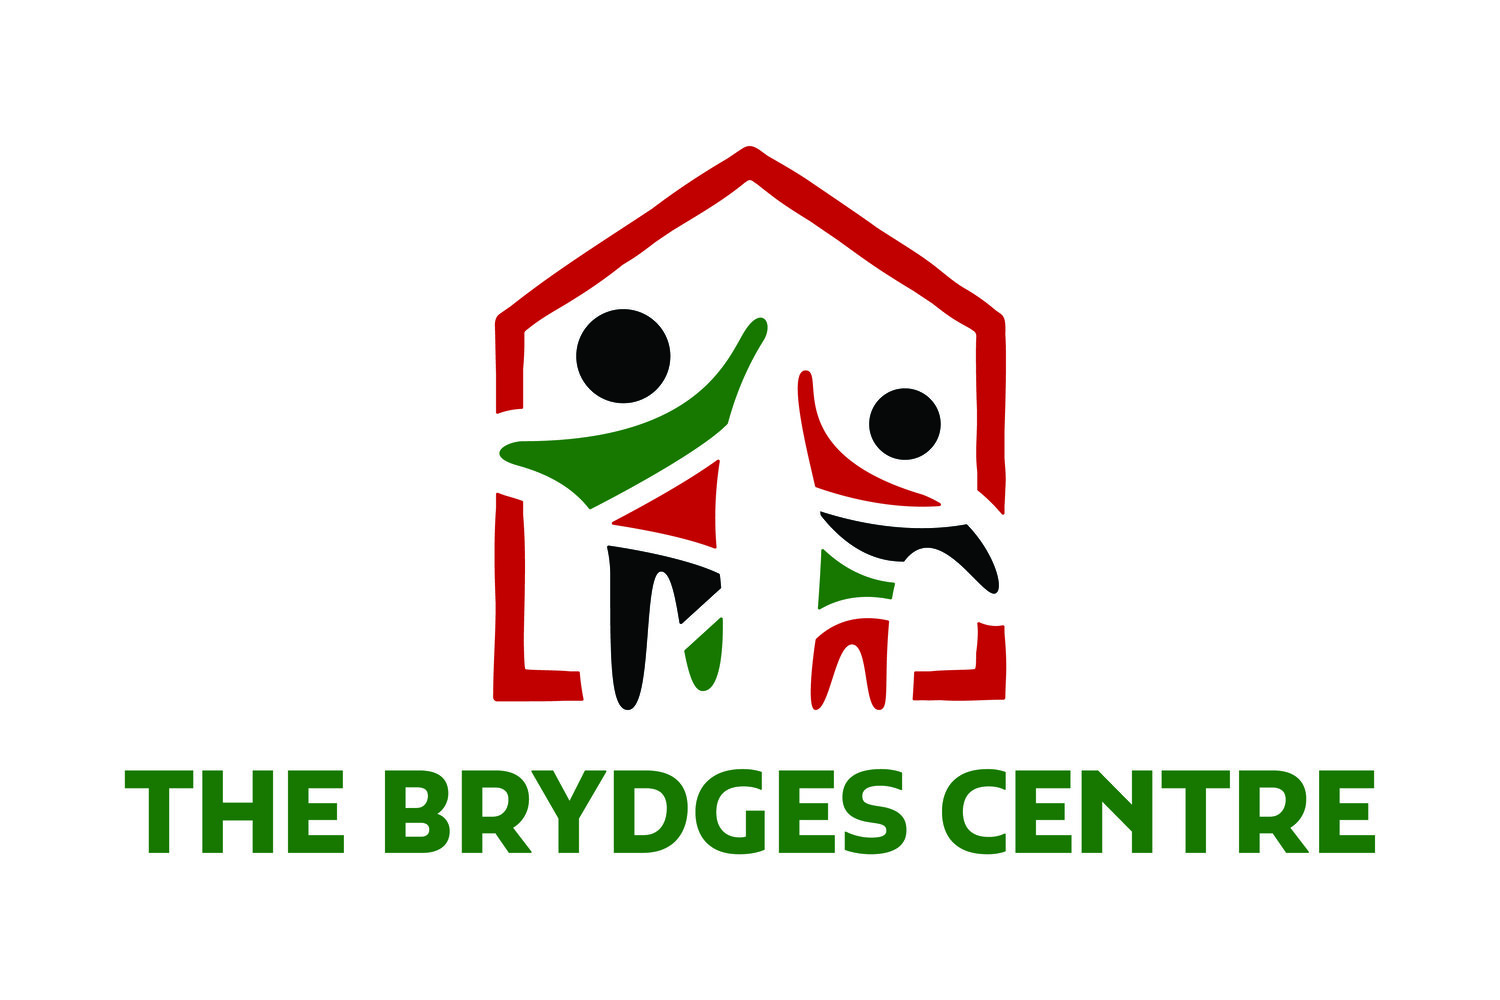 The Brydges Centre